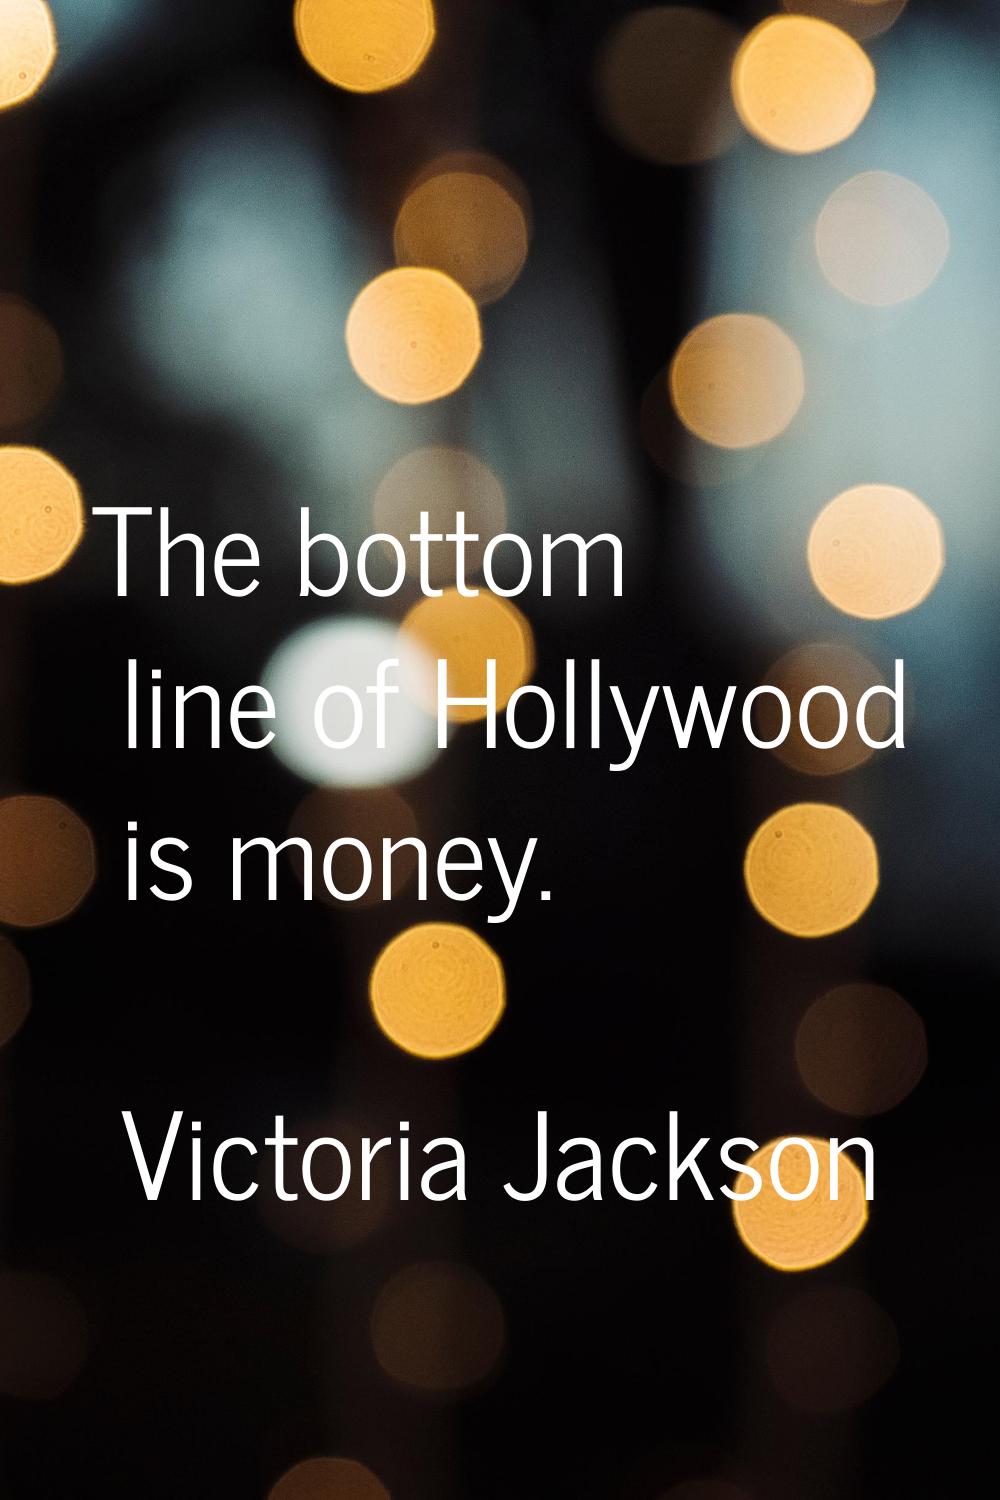 The bottom line of Hollywood is money.